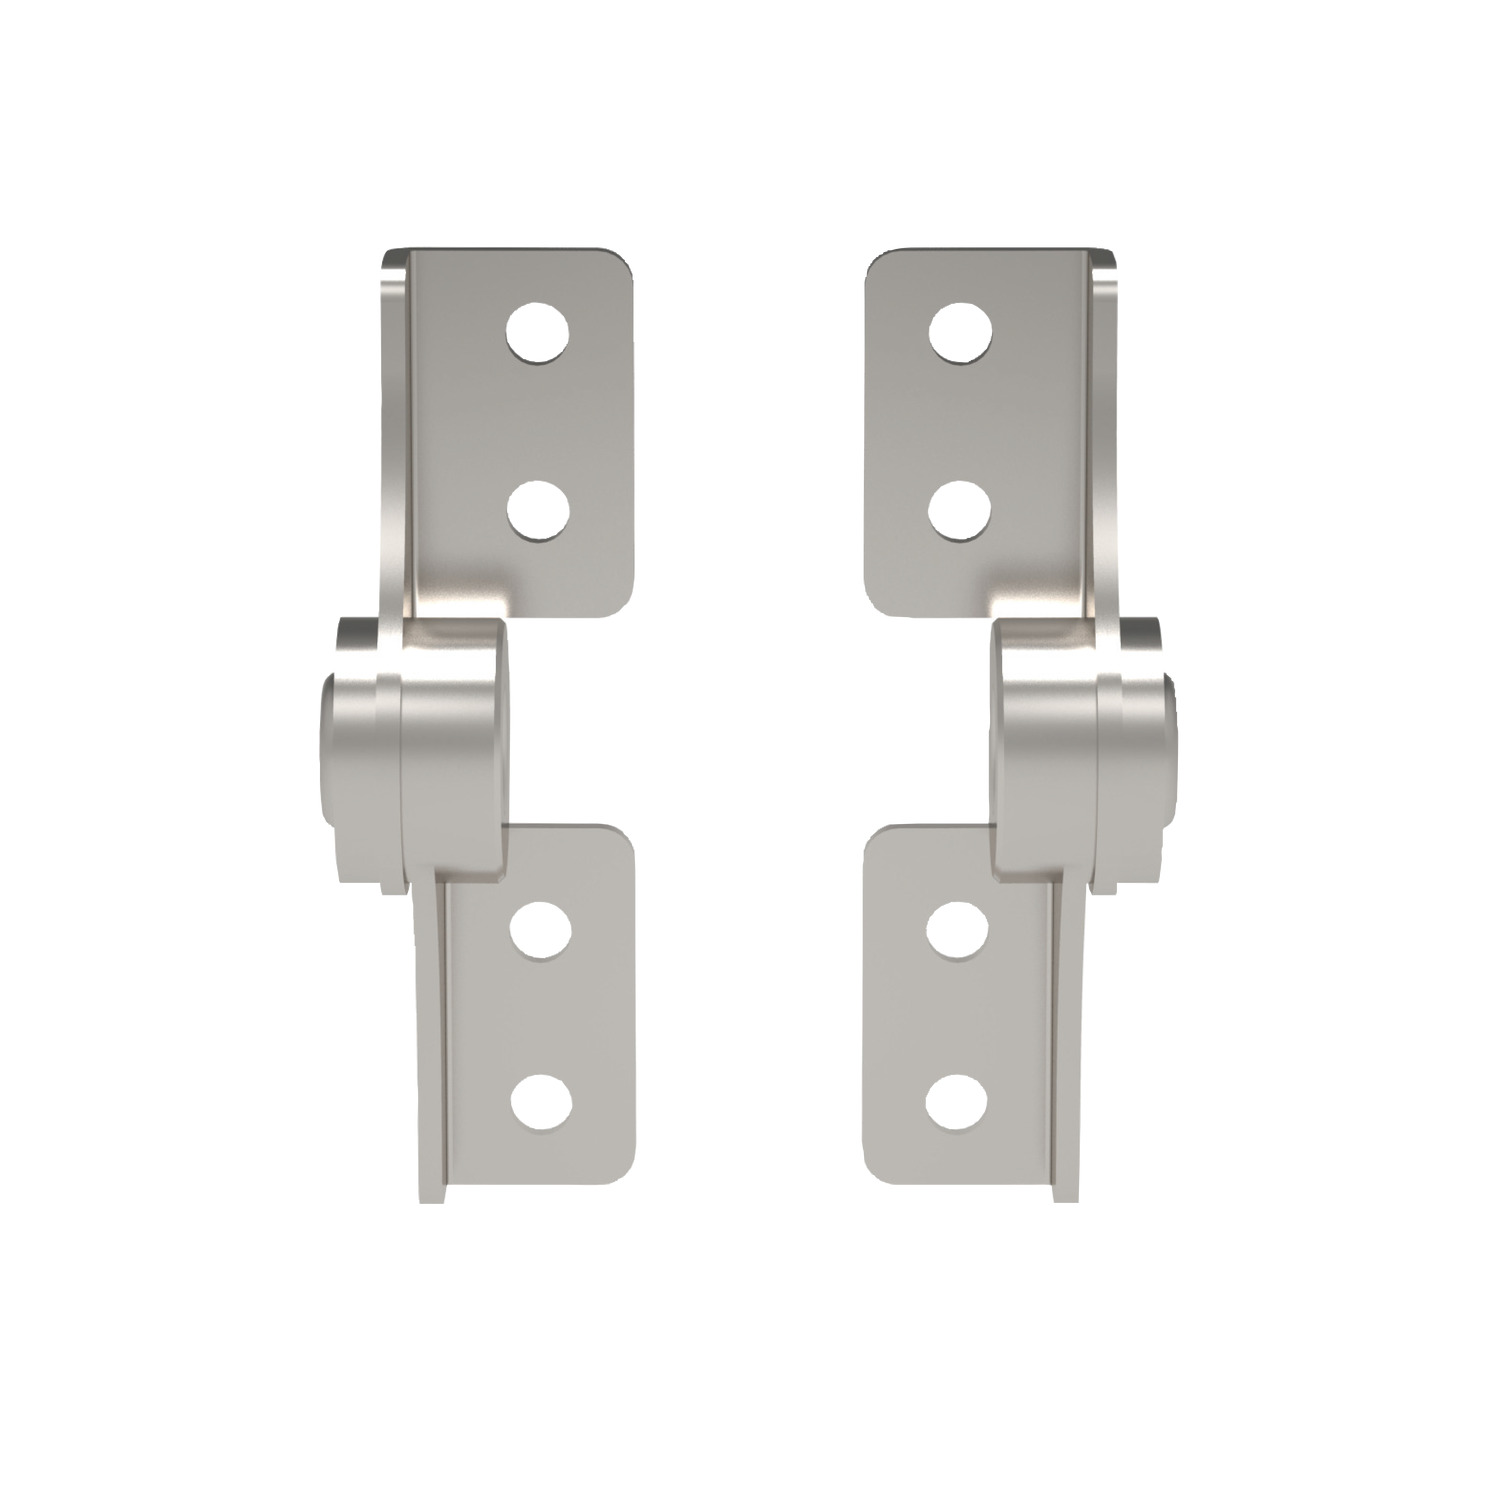 S4026.AC0010 Constant Torque - Friction Torque Hinges Screw mount - Stainless steel - Right - 45,9 Torque kgf/cm +/-20% With Wiring Hole